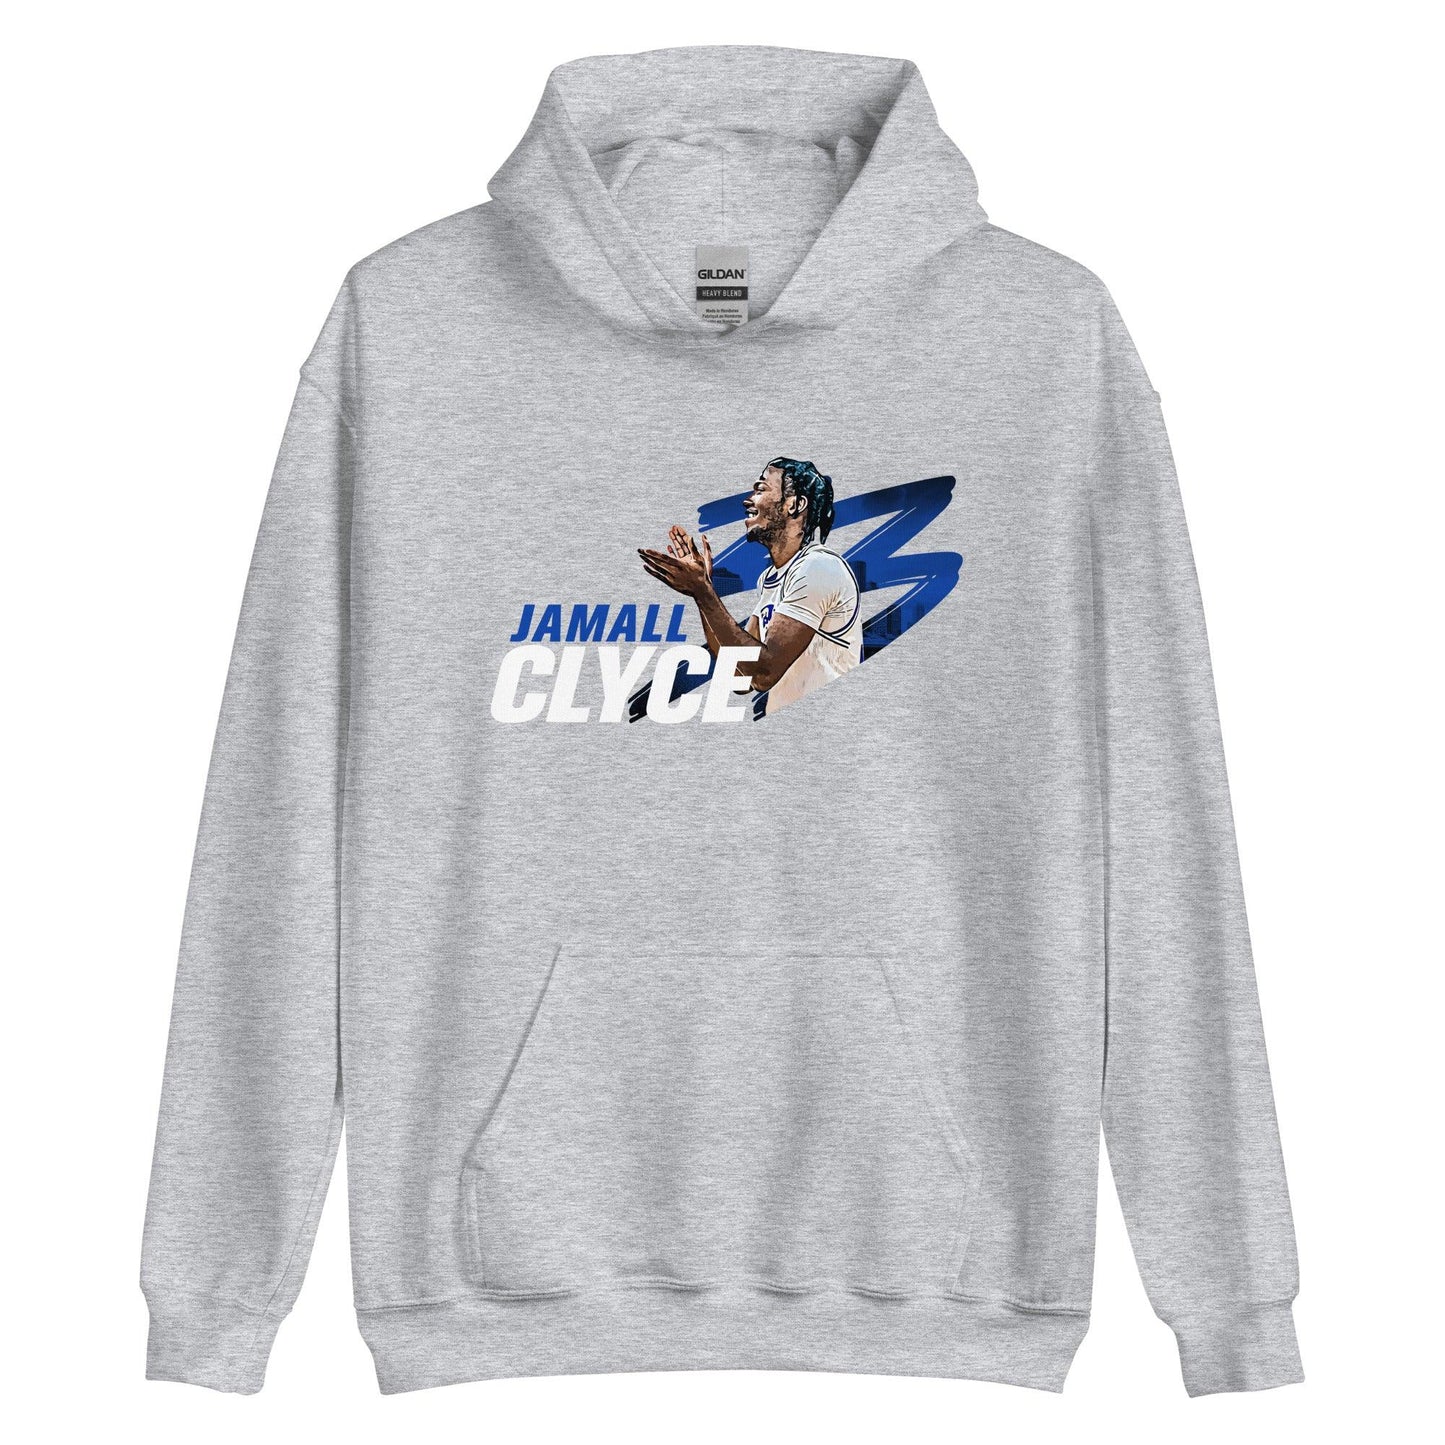 Jamall Clyce "Gameday" Hoodie - Fan Arch